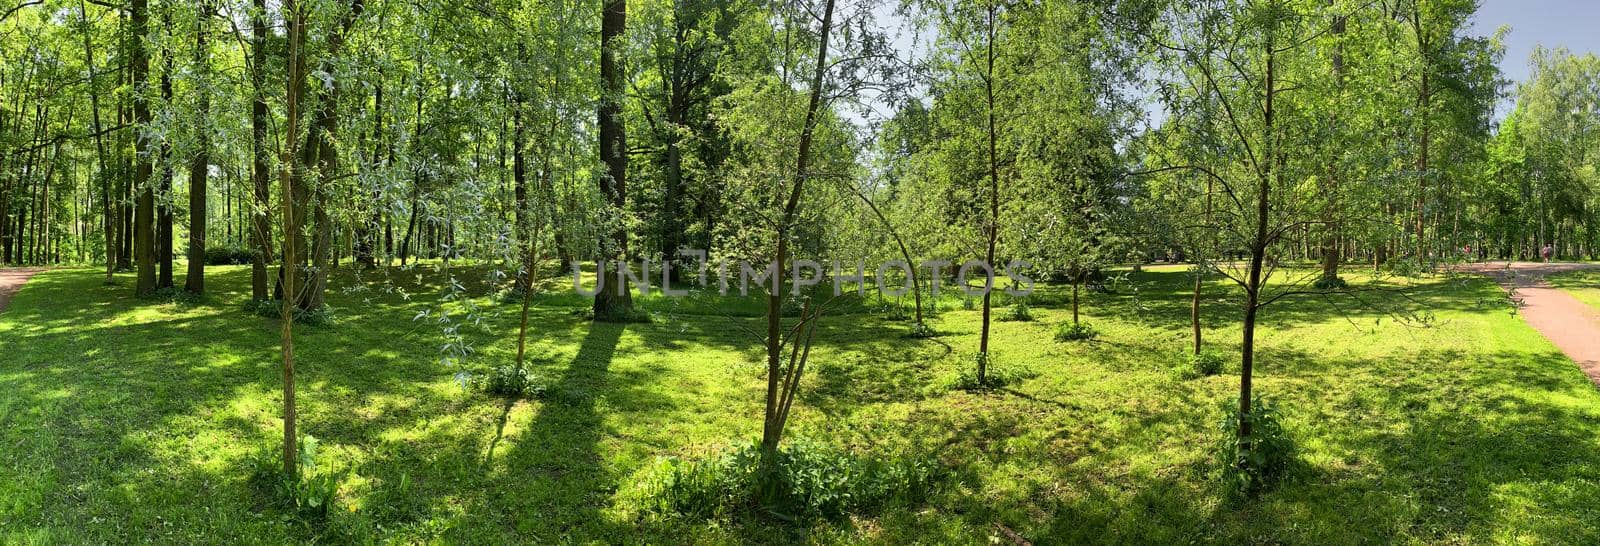 Panorama of first days of autumn in a park, long shadows, blue sky, Buds of trees, Trunks of birches, sunny day, path in the woods, yellow leafs by vladimirdrozdin